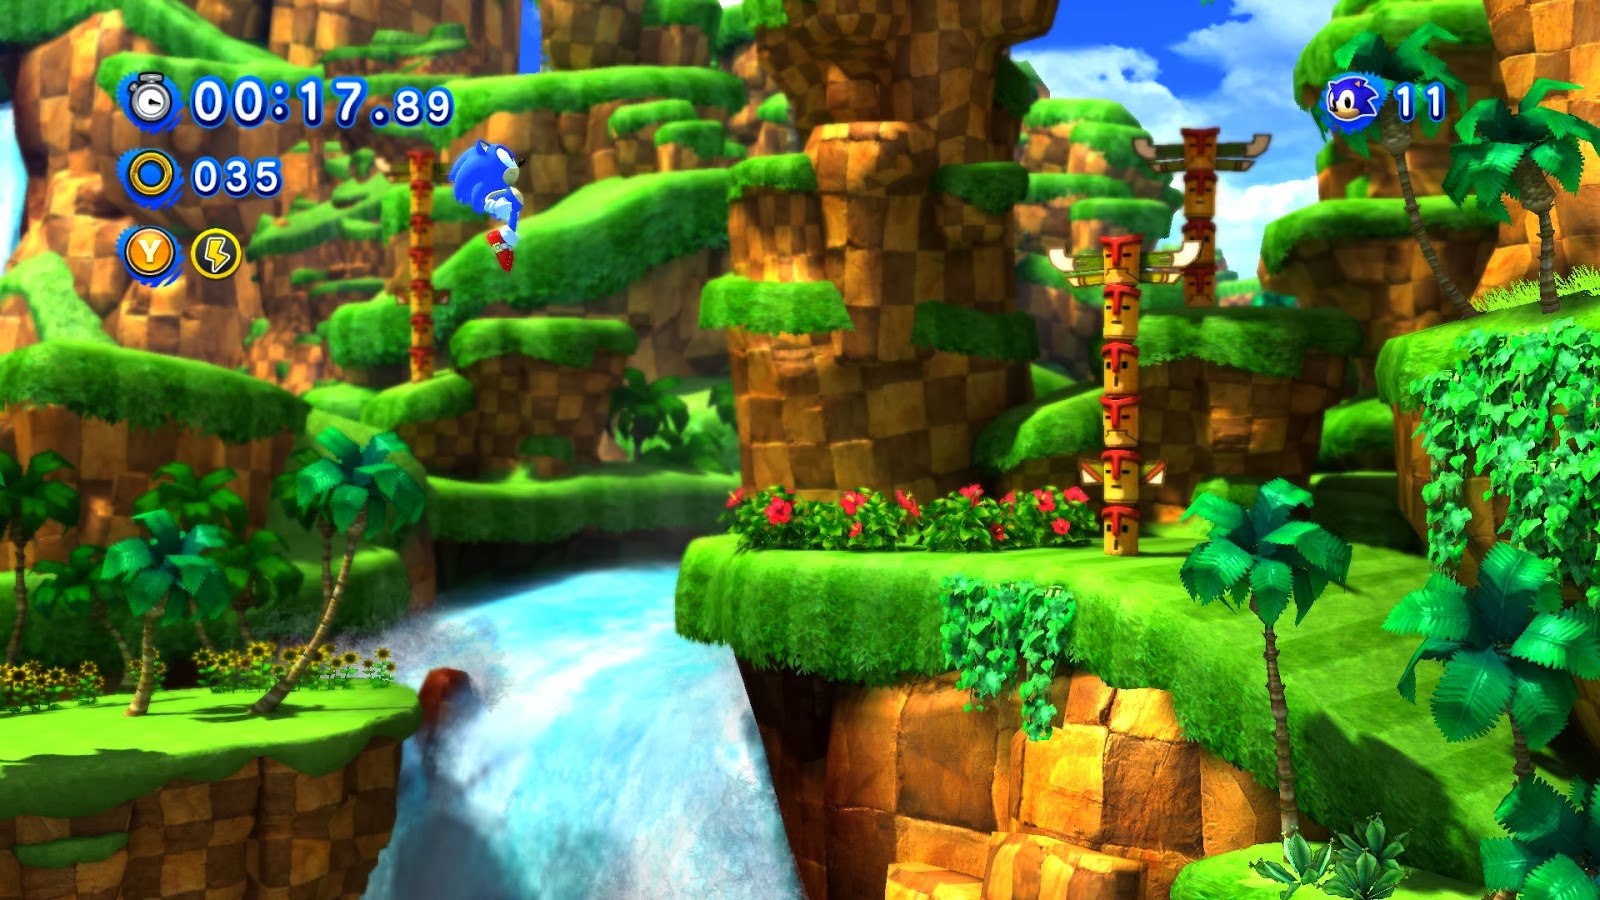 Download Sonic Generations Pc Full Version Free Highly Compressed